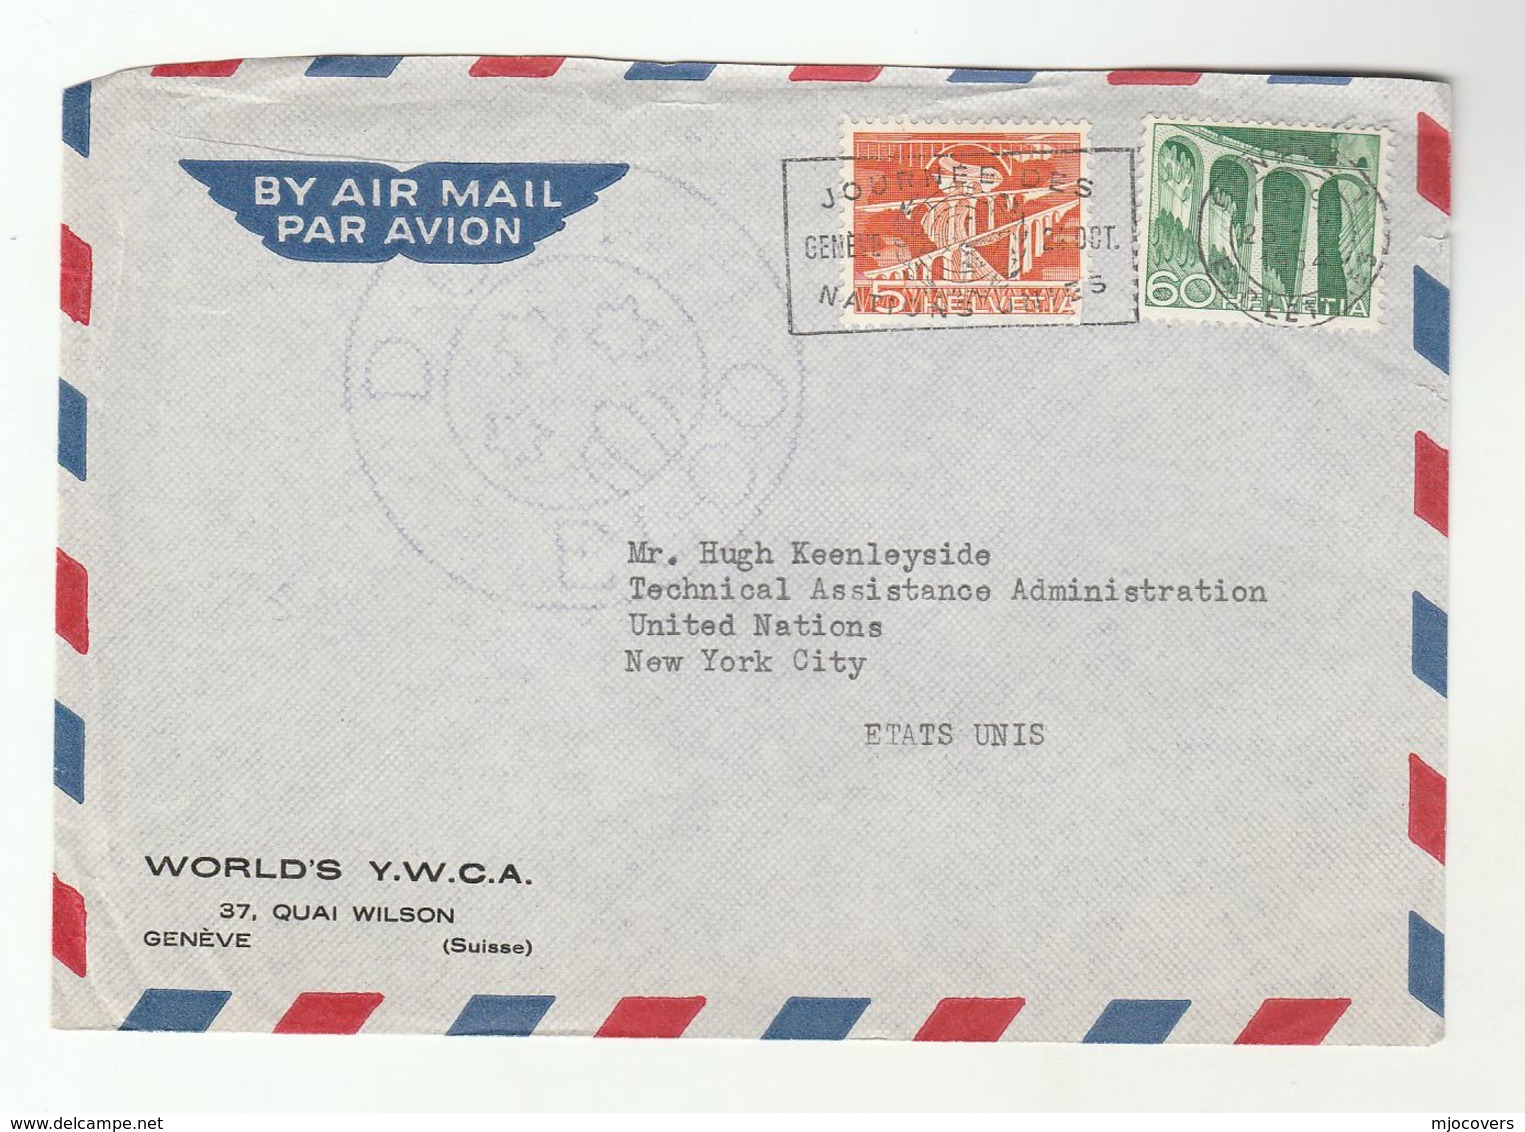 1954 WORLDS VWCA SWITZERLAND Cover SLOGAN Pmk UNITED NATIONS DAY GENEVE To UN USA Airmail - Covers & Documents